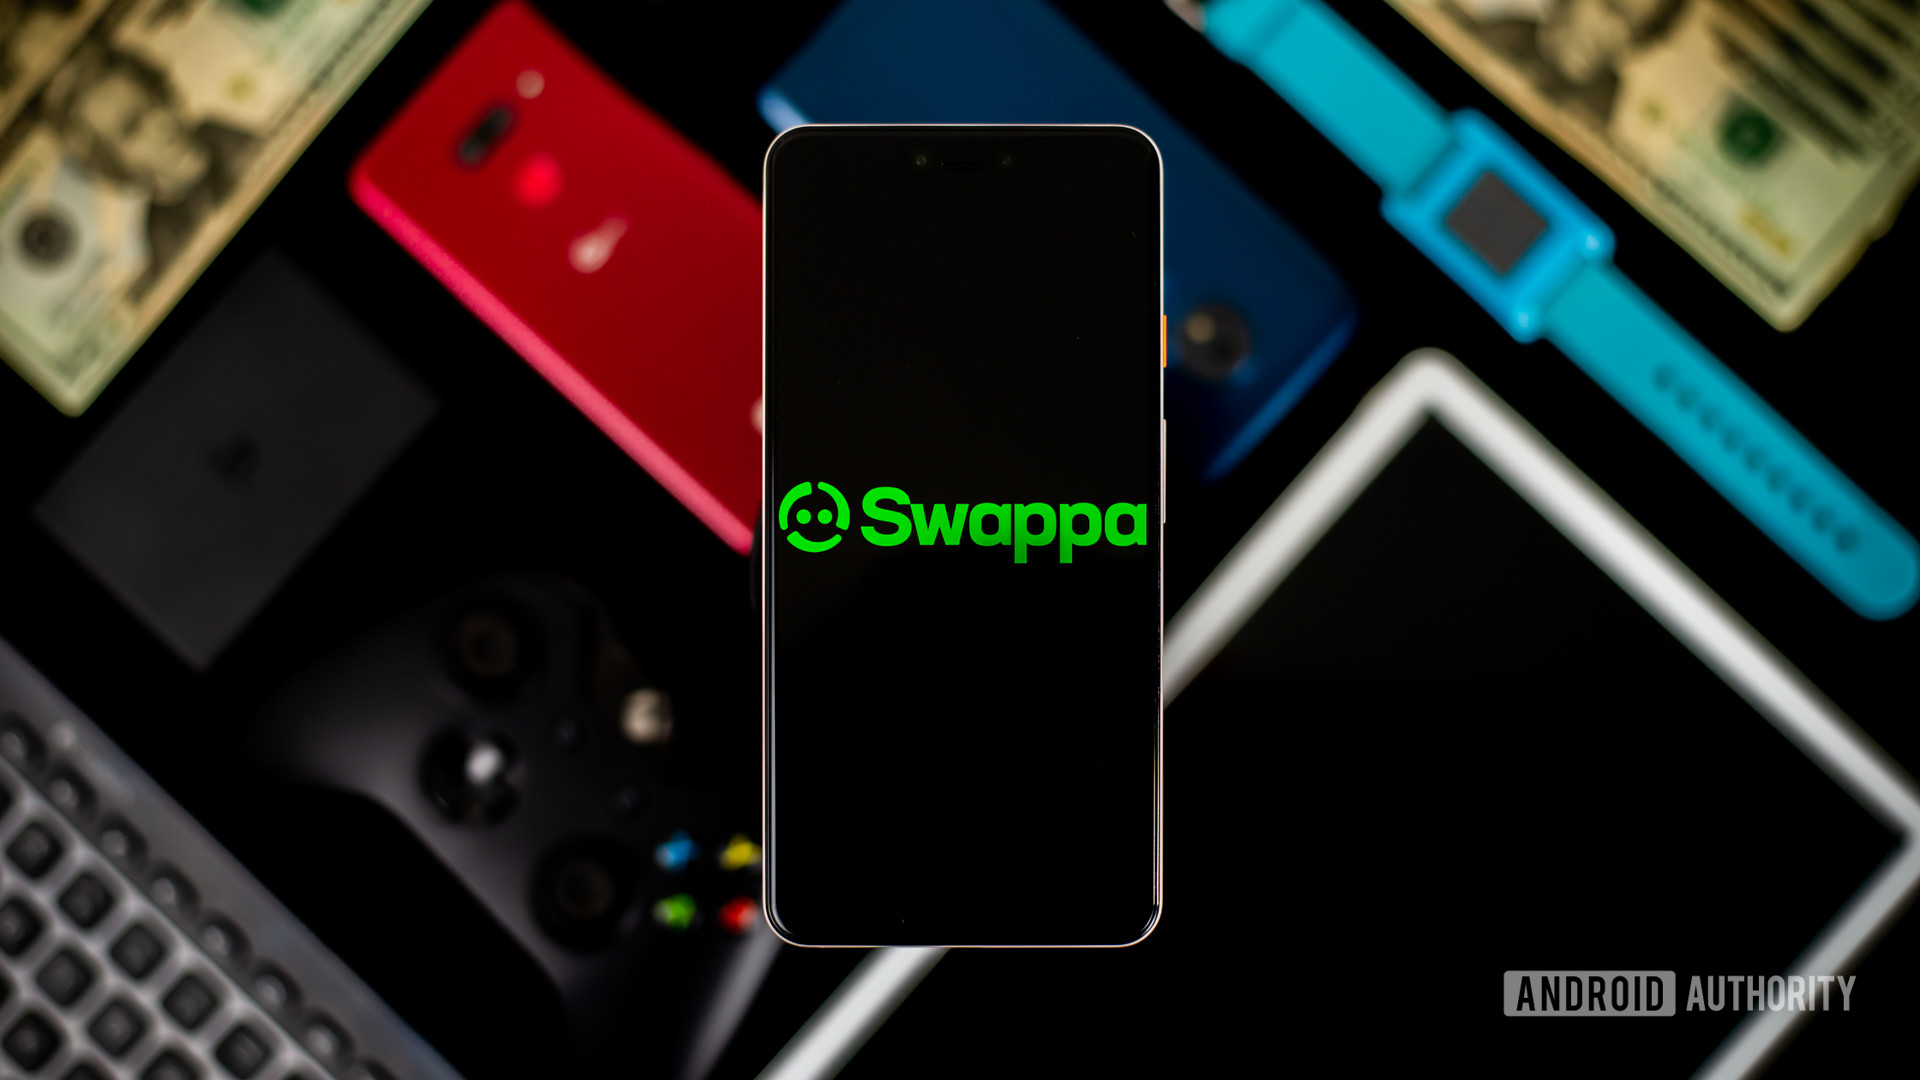 Swappa logo on smartphone with devices on background stock - Selling phones